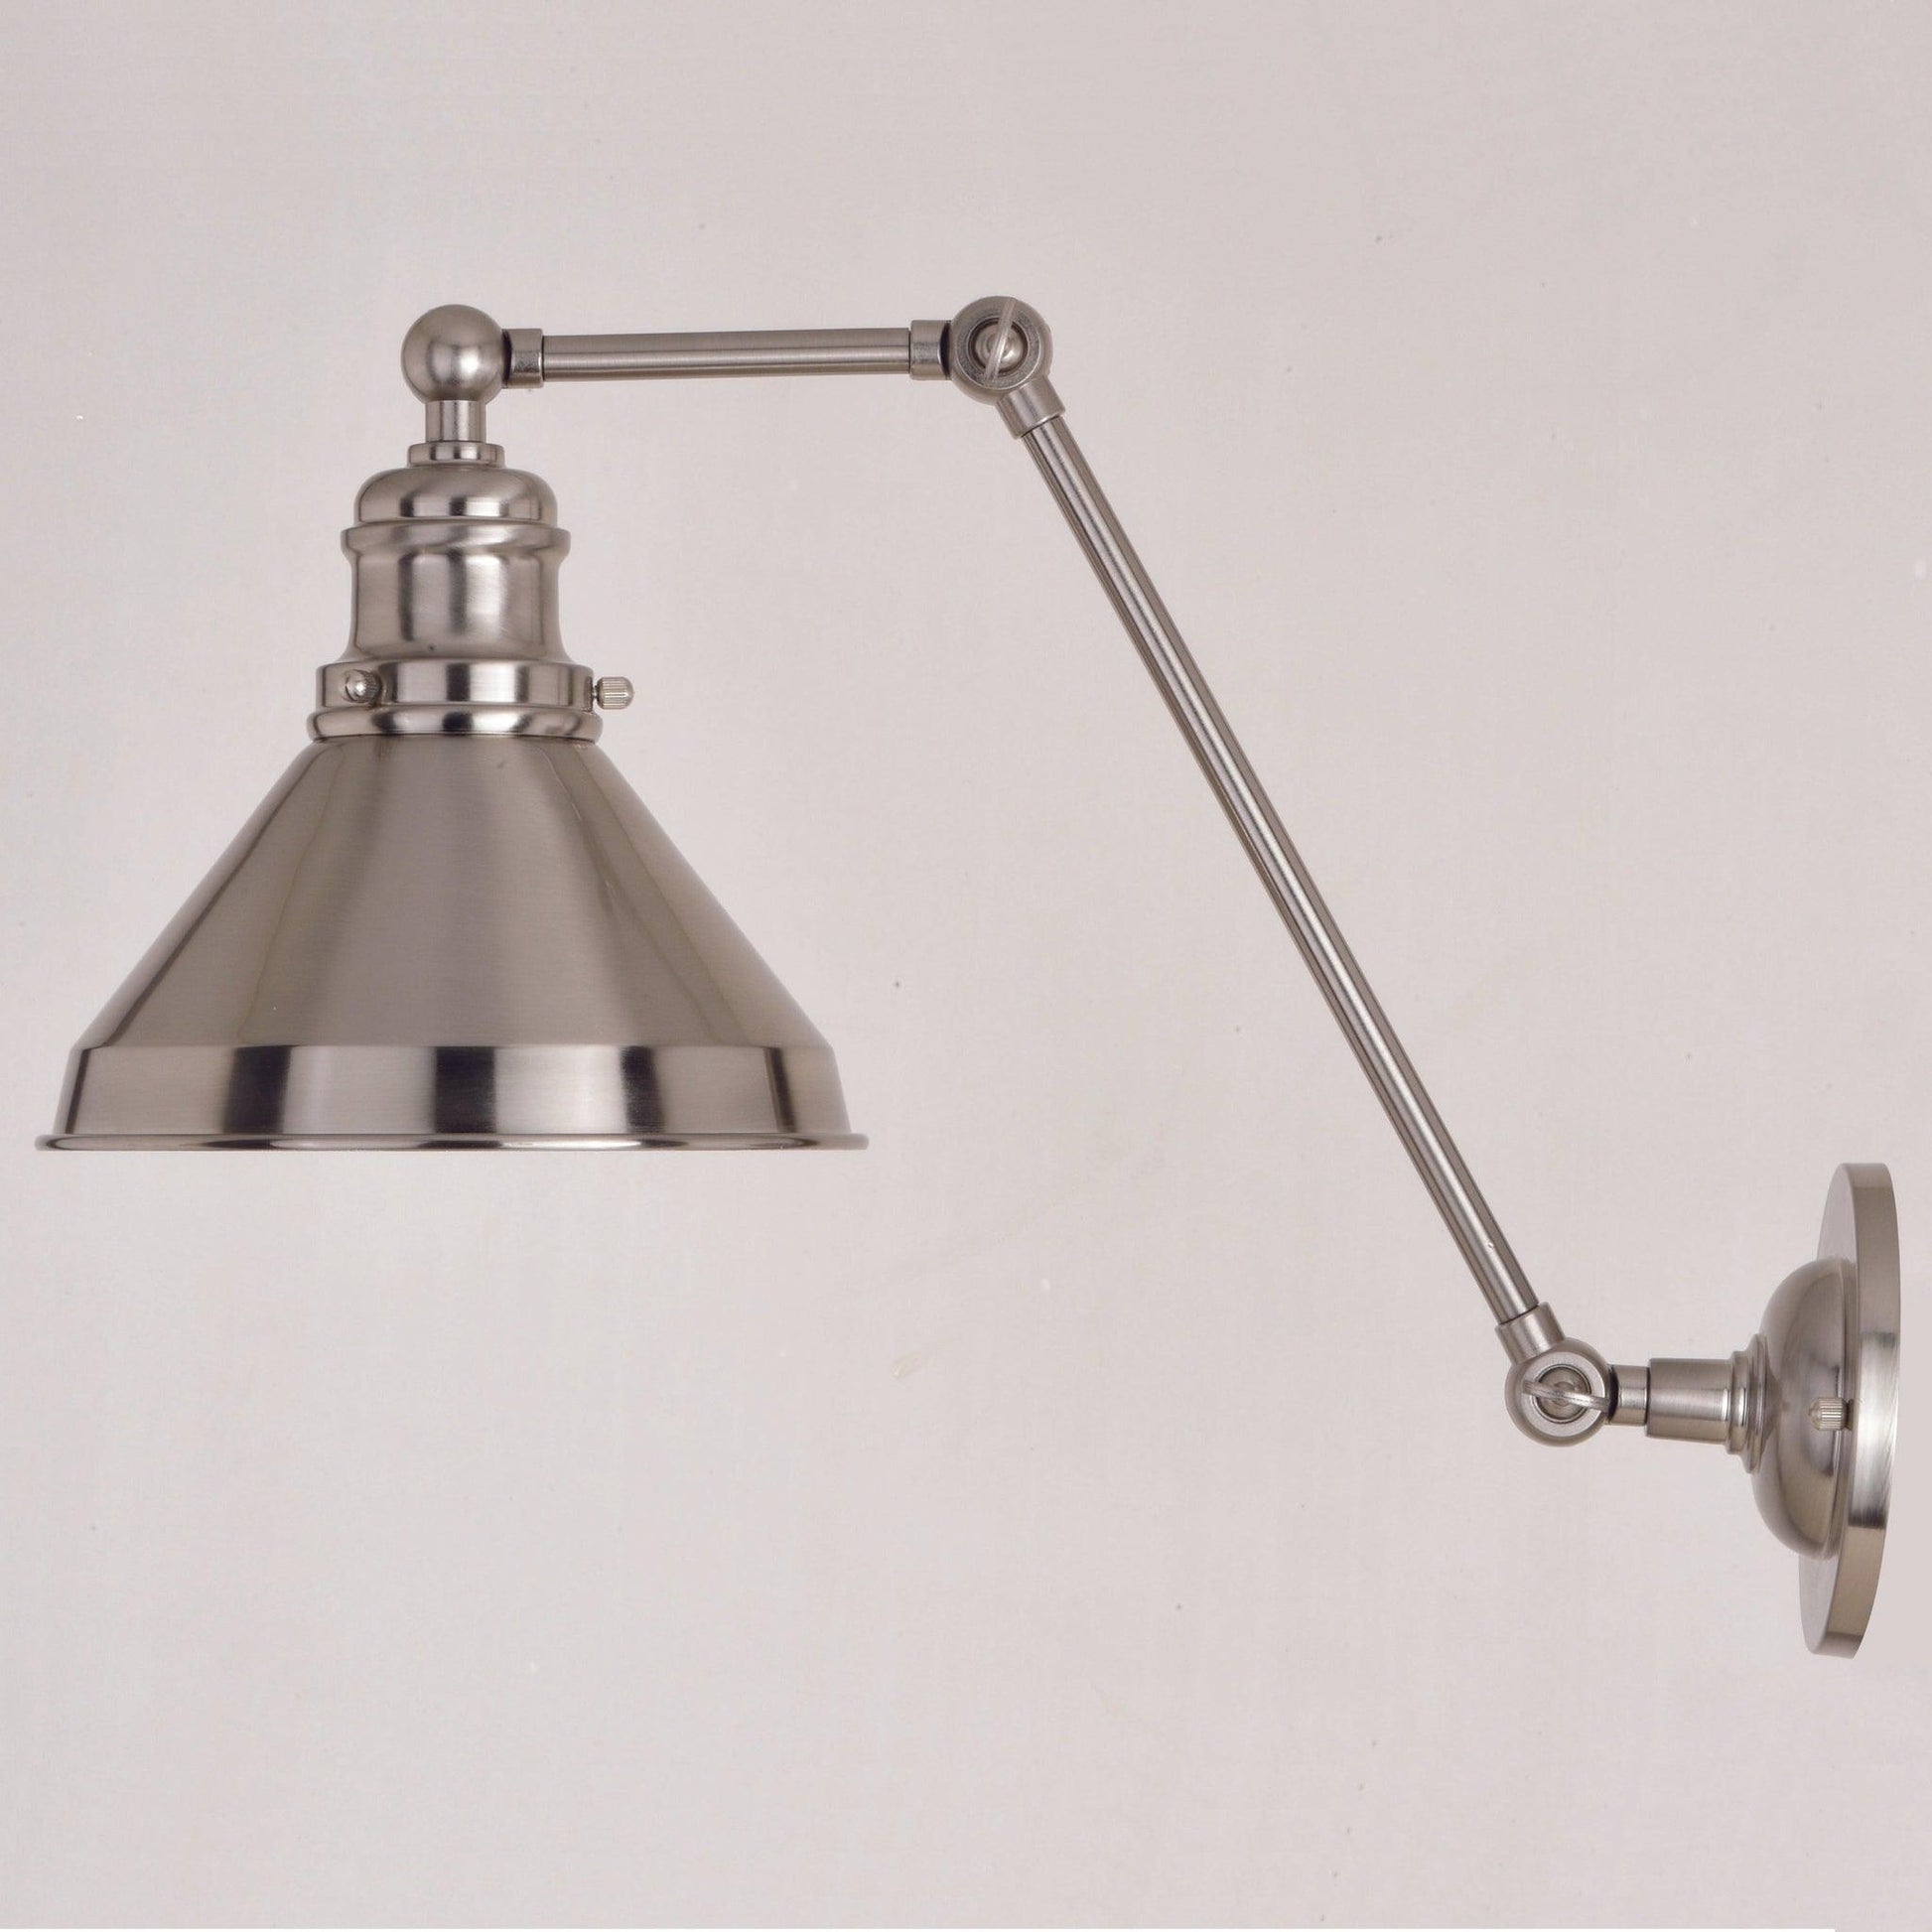 Vaxcel Alexis 8" 1-Light Satin Nickel and Matte White Adjustable Swing Arm Wall Light With Metal Shade